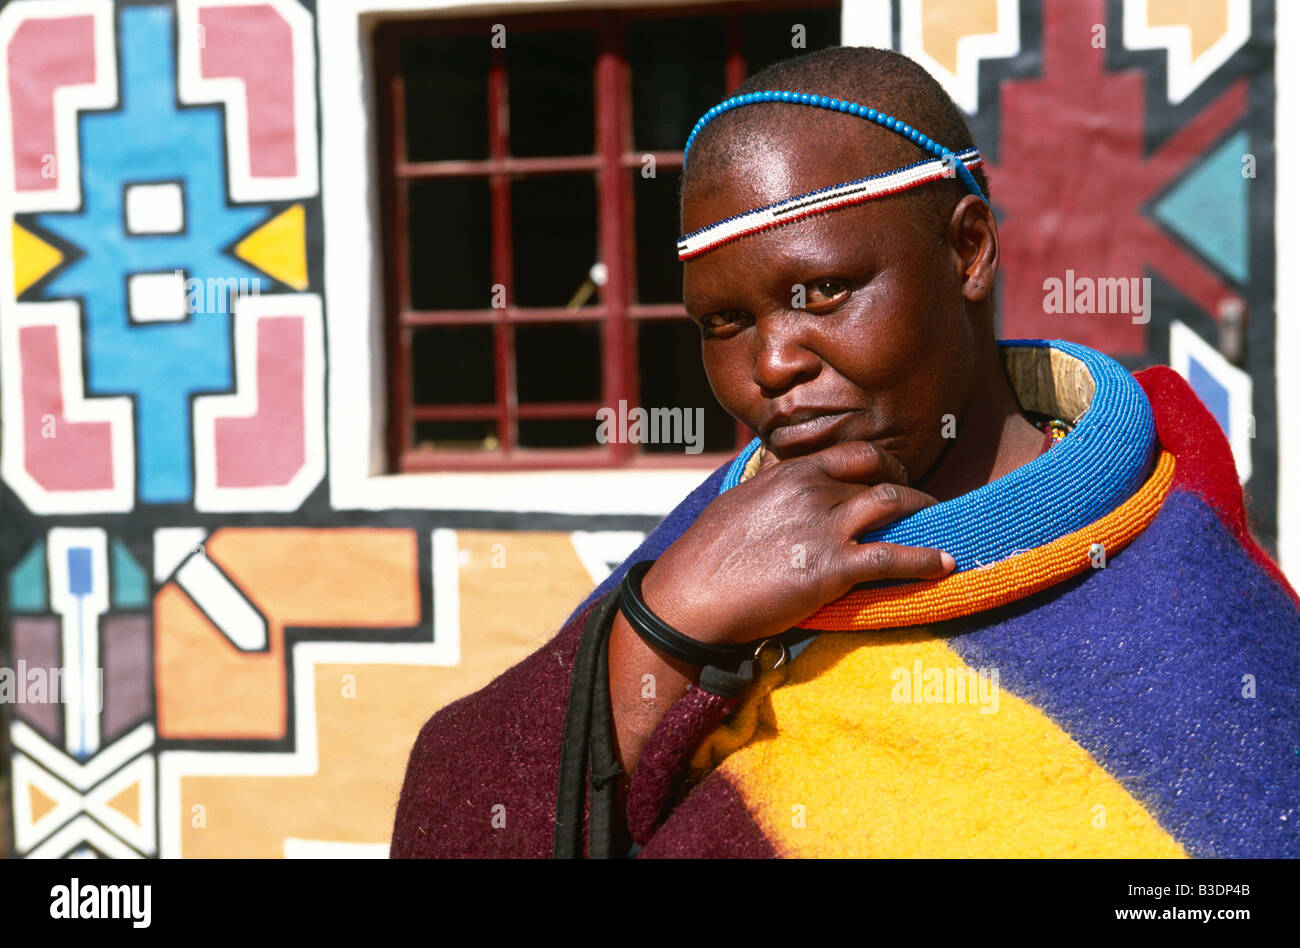 Ndebele tribeswoman wearing beaded headdress and traditional costume, portrait, South Africa, Africa Stock Photo